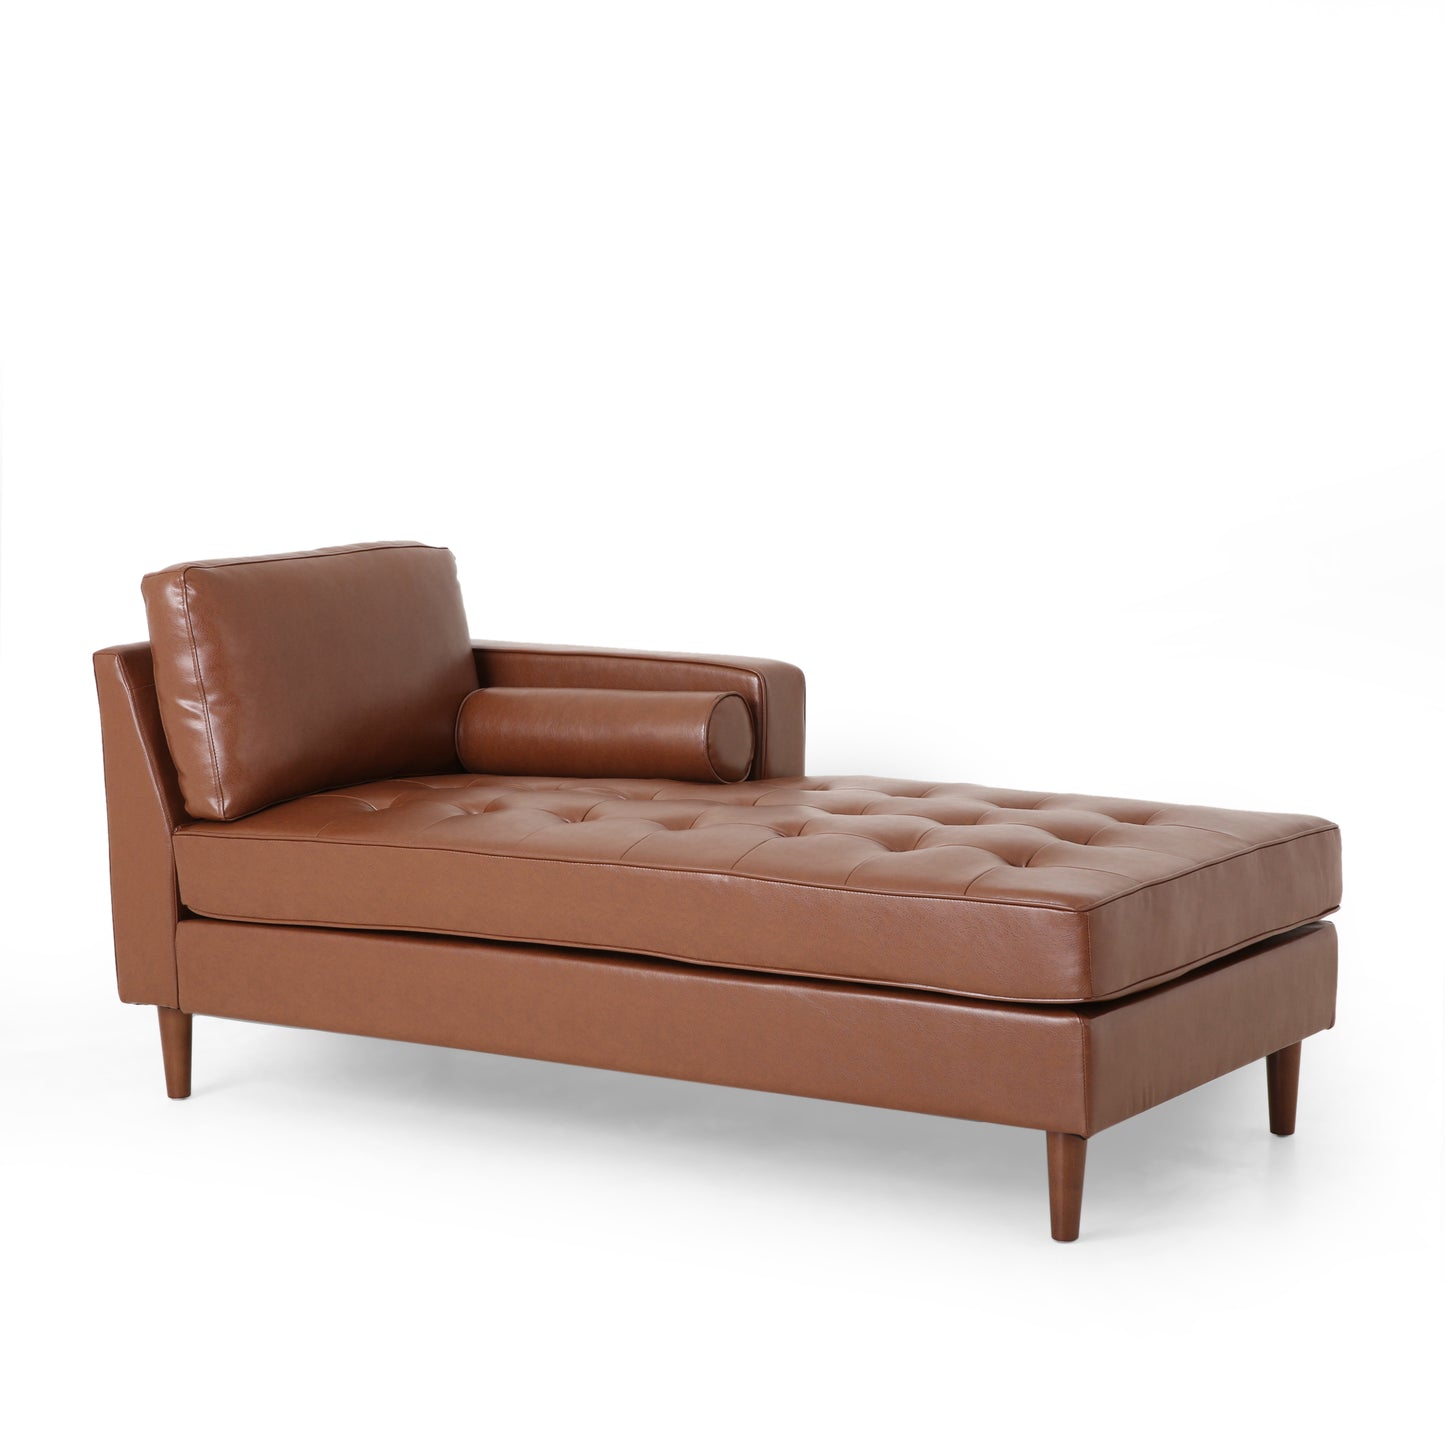 Hixon Contemporary Tufted Upholstered Chaise Lounge